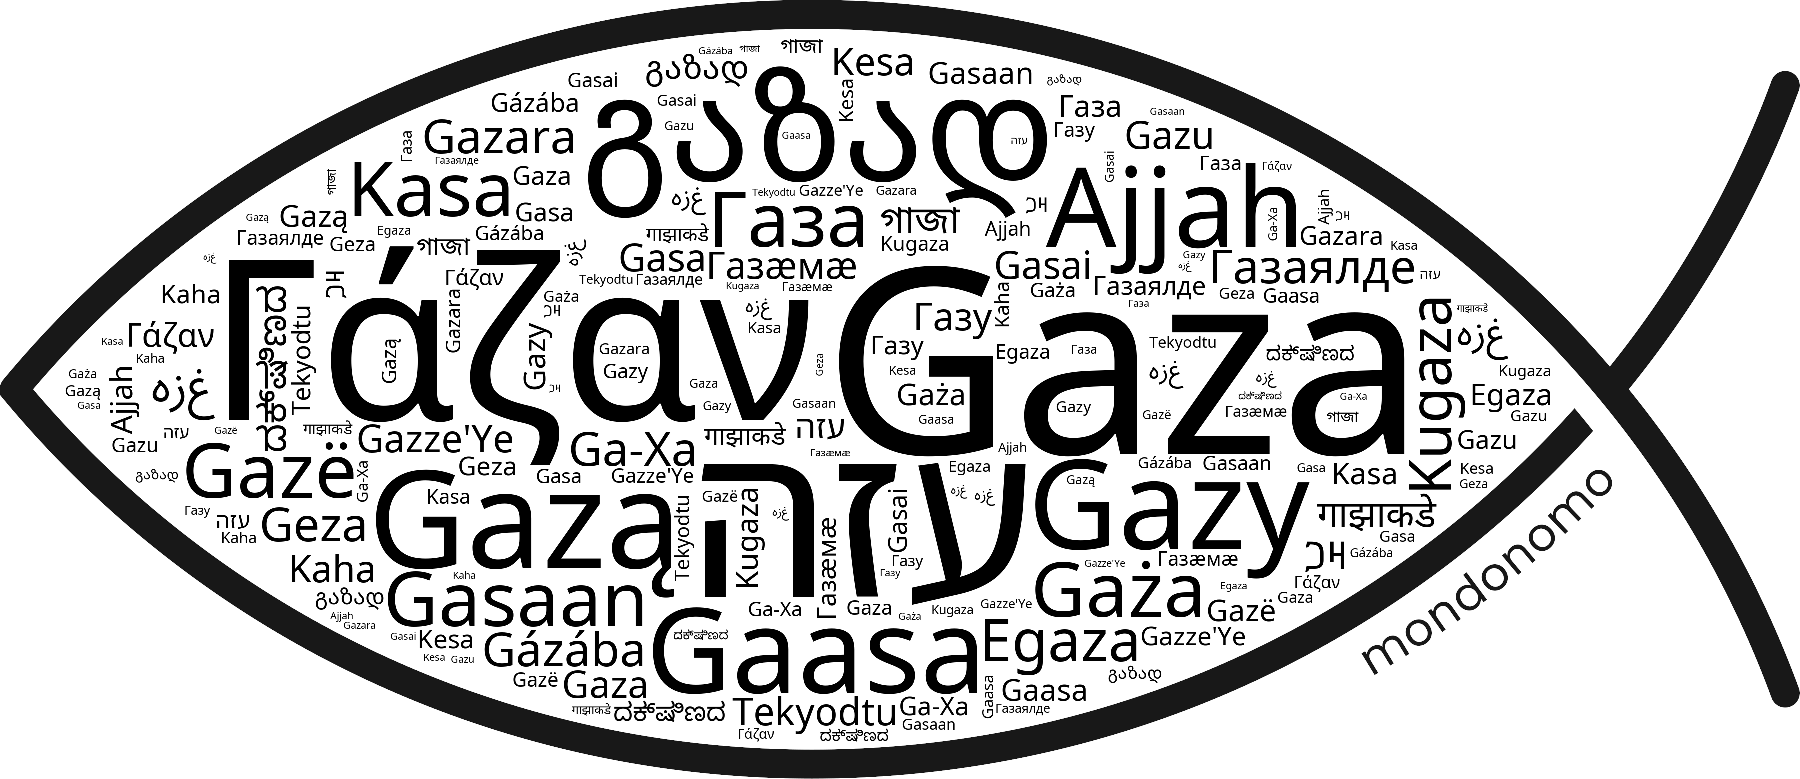 Name Gaza in the world's Bibles